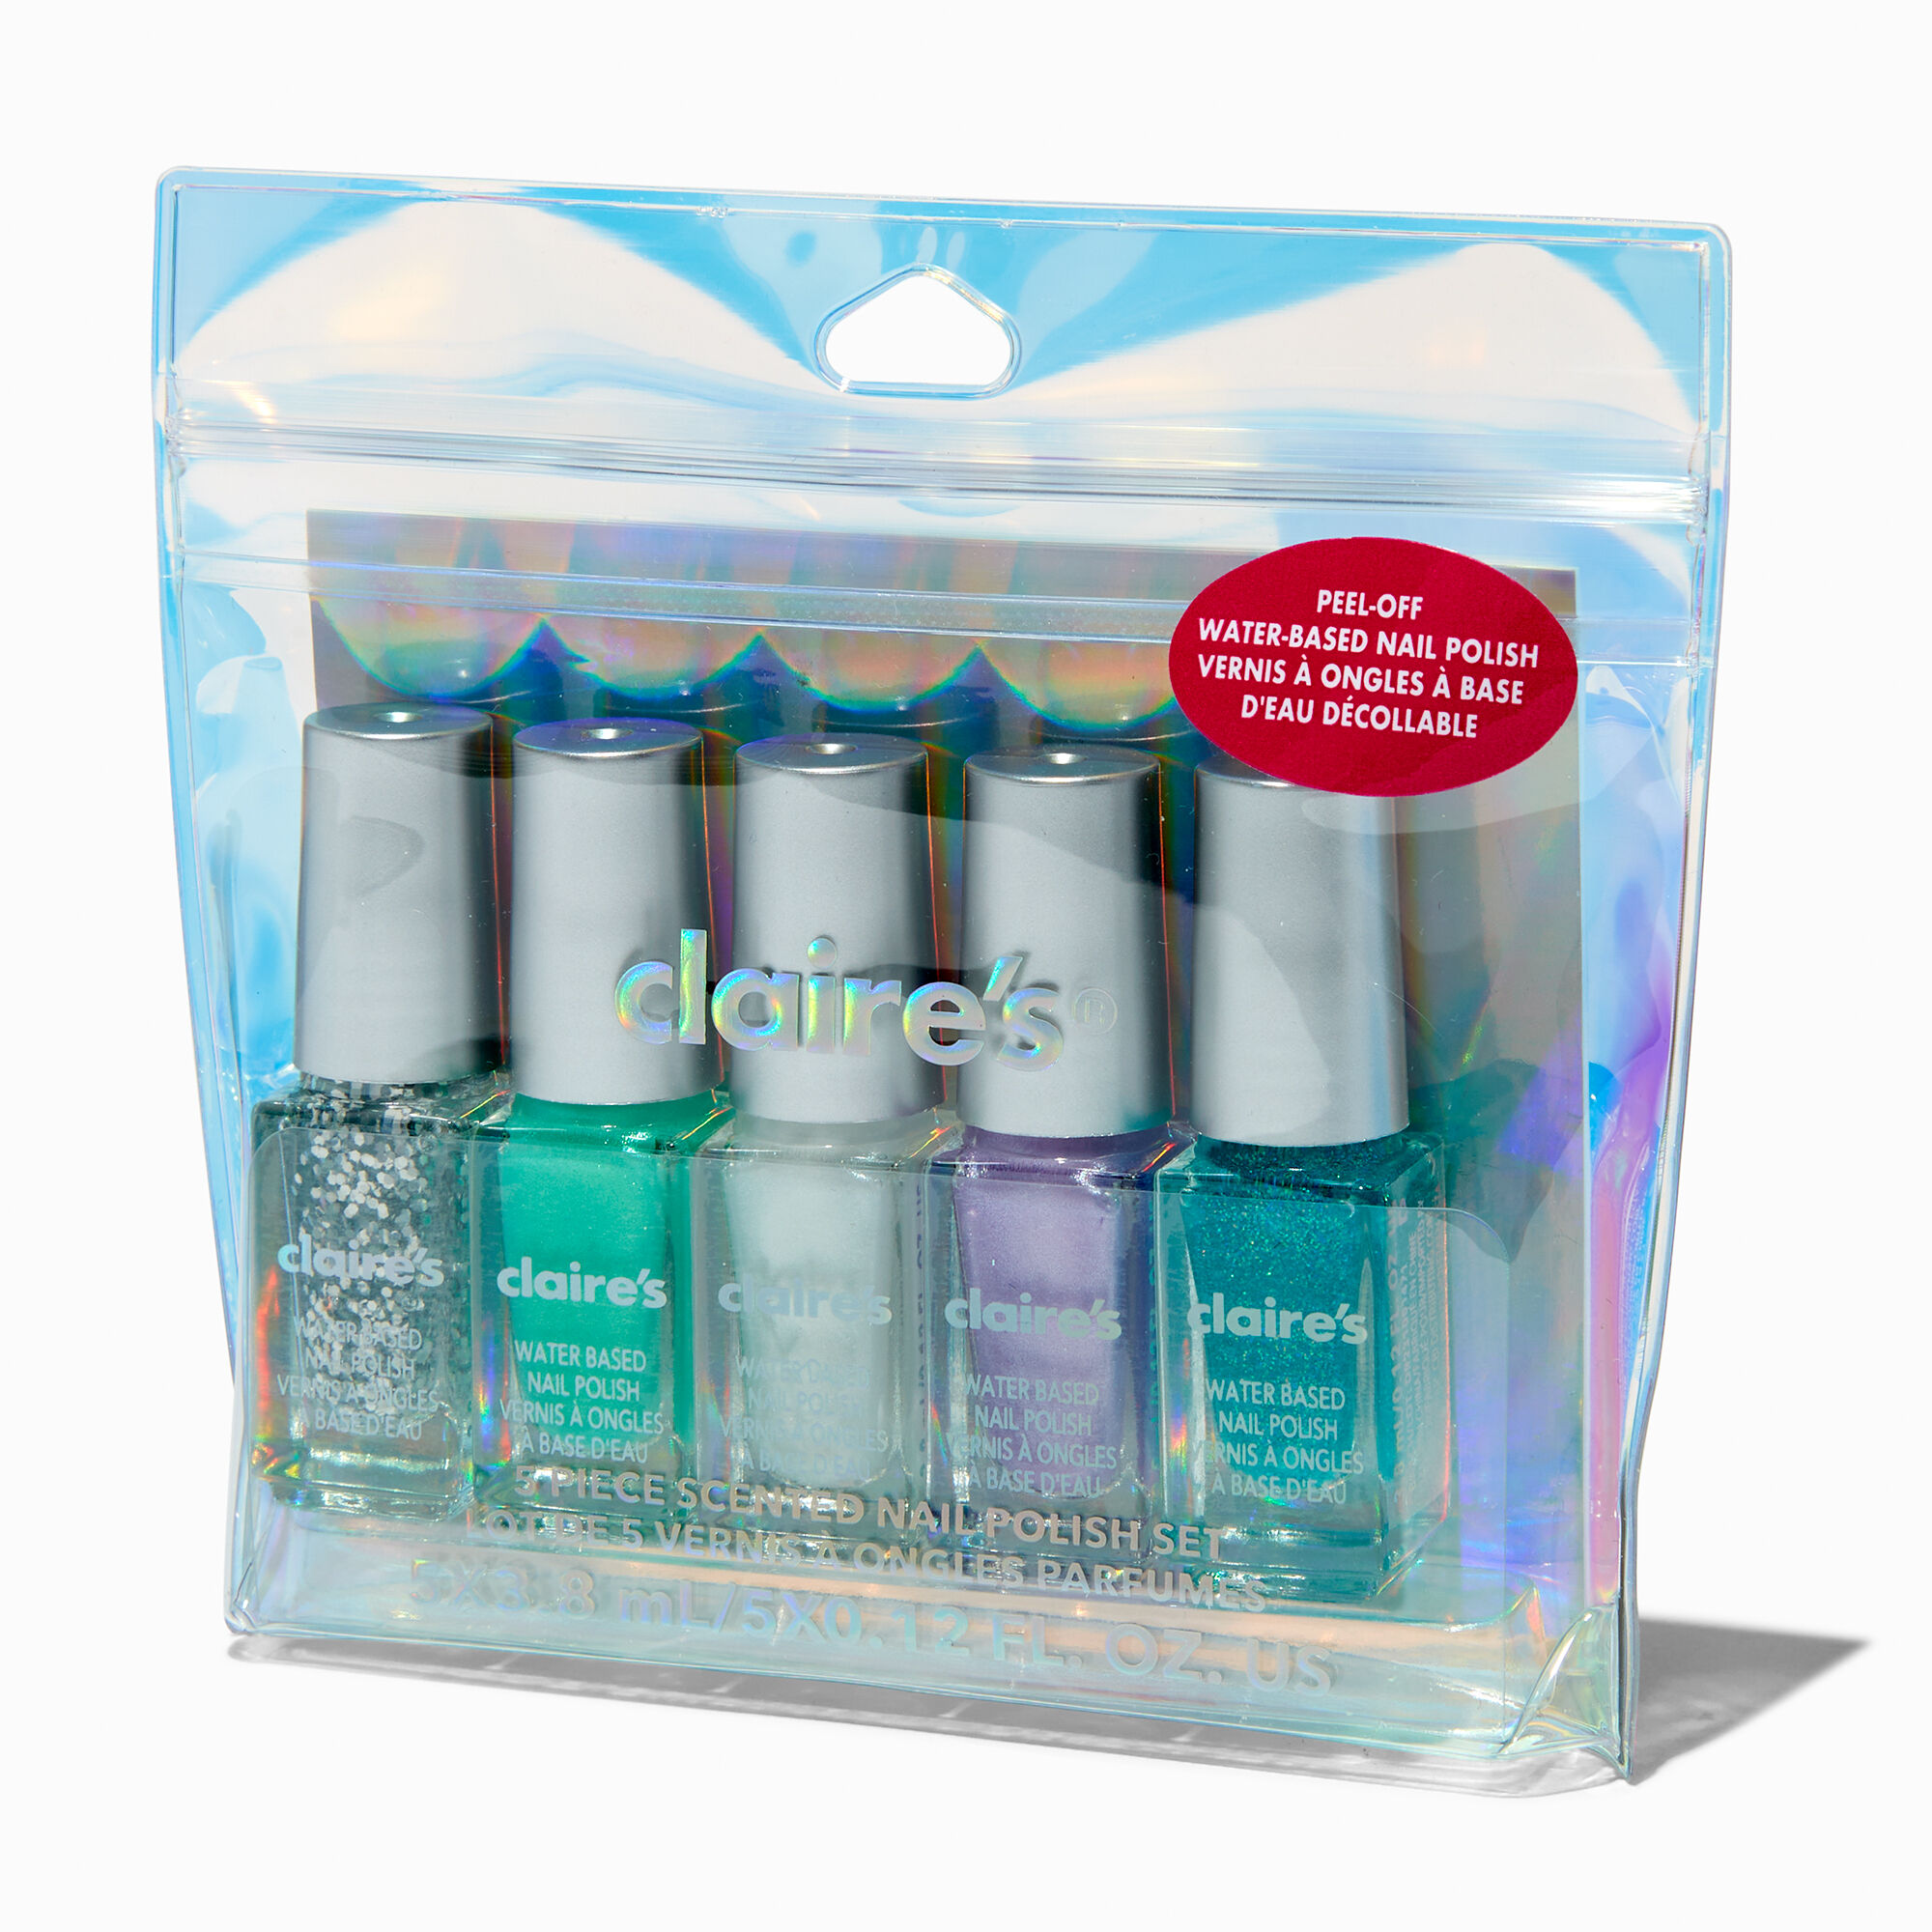 View Claires Mermaid Scented Peel Off Nail Polish Set 5 Pack Blue information